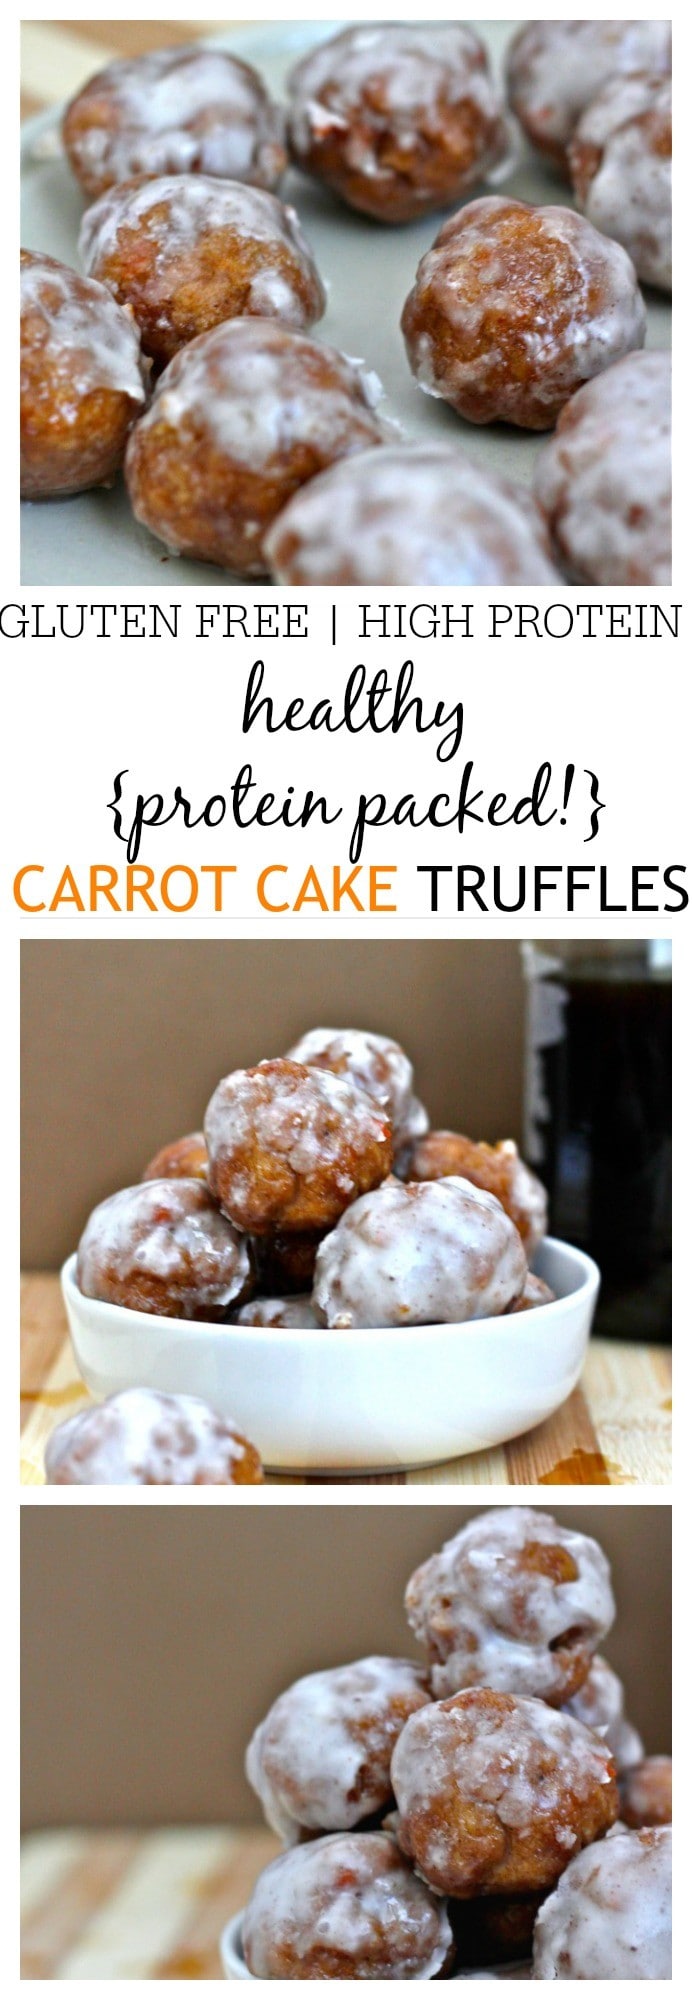 Healthy {Protein Packed} Carrot Cake Truffles- These healthy Carrot Cake Truffles are SO simple to whip up and you'd never tell they were nutritious! High in protein, very low in sugar and naturally gluten free, these are the perfect snack or pre/post workout treat! @thebigmansworld - thebigmansworld.com